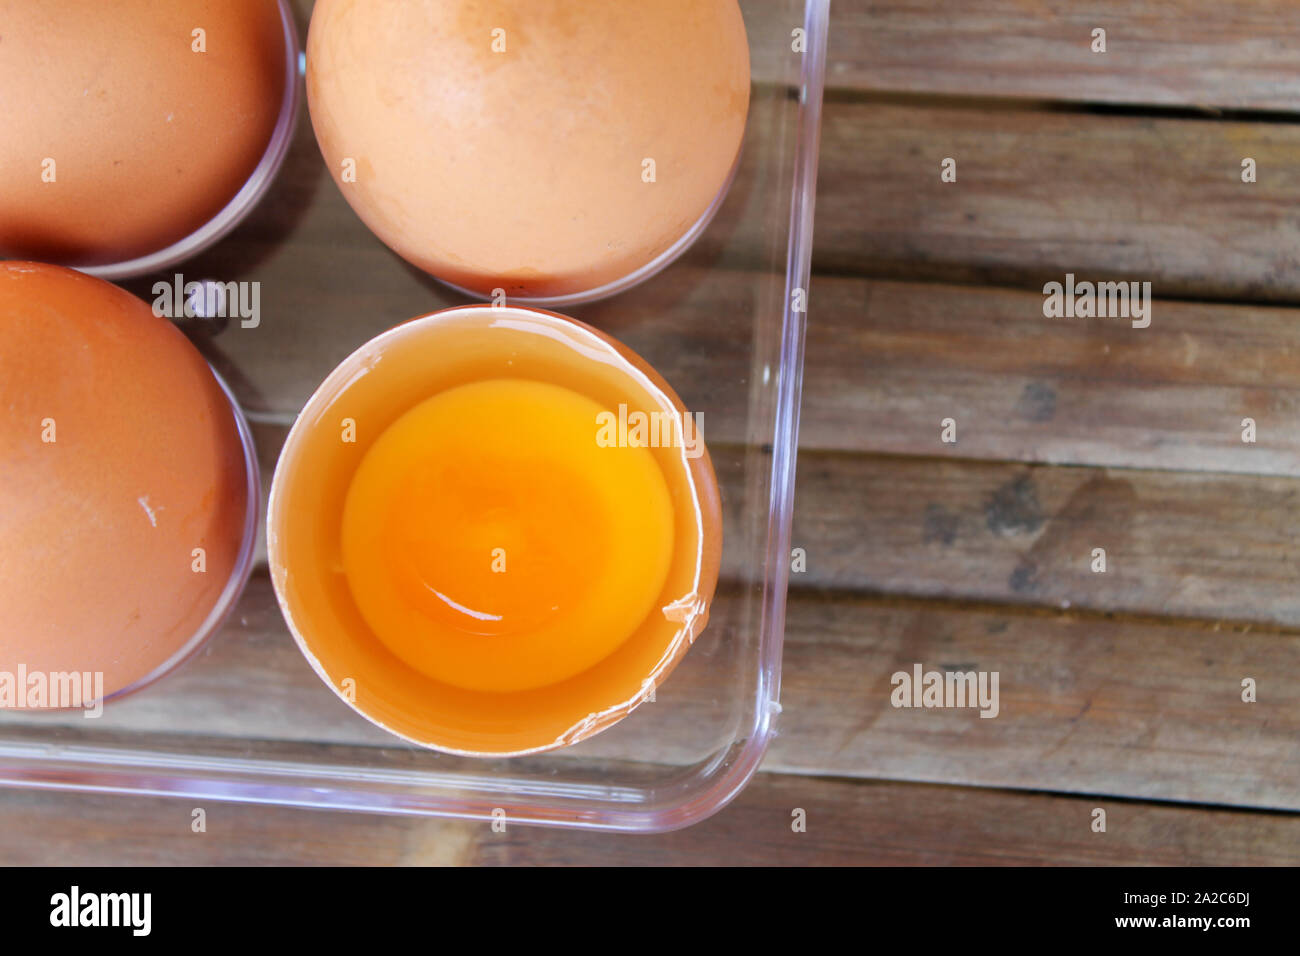 top view of broken eggshell with yellow yolk near eggs in plastic box Stock Photo